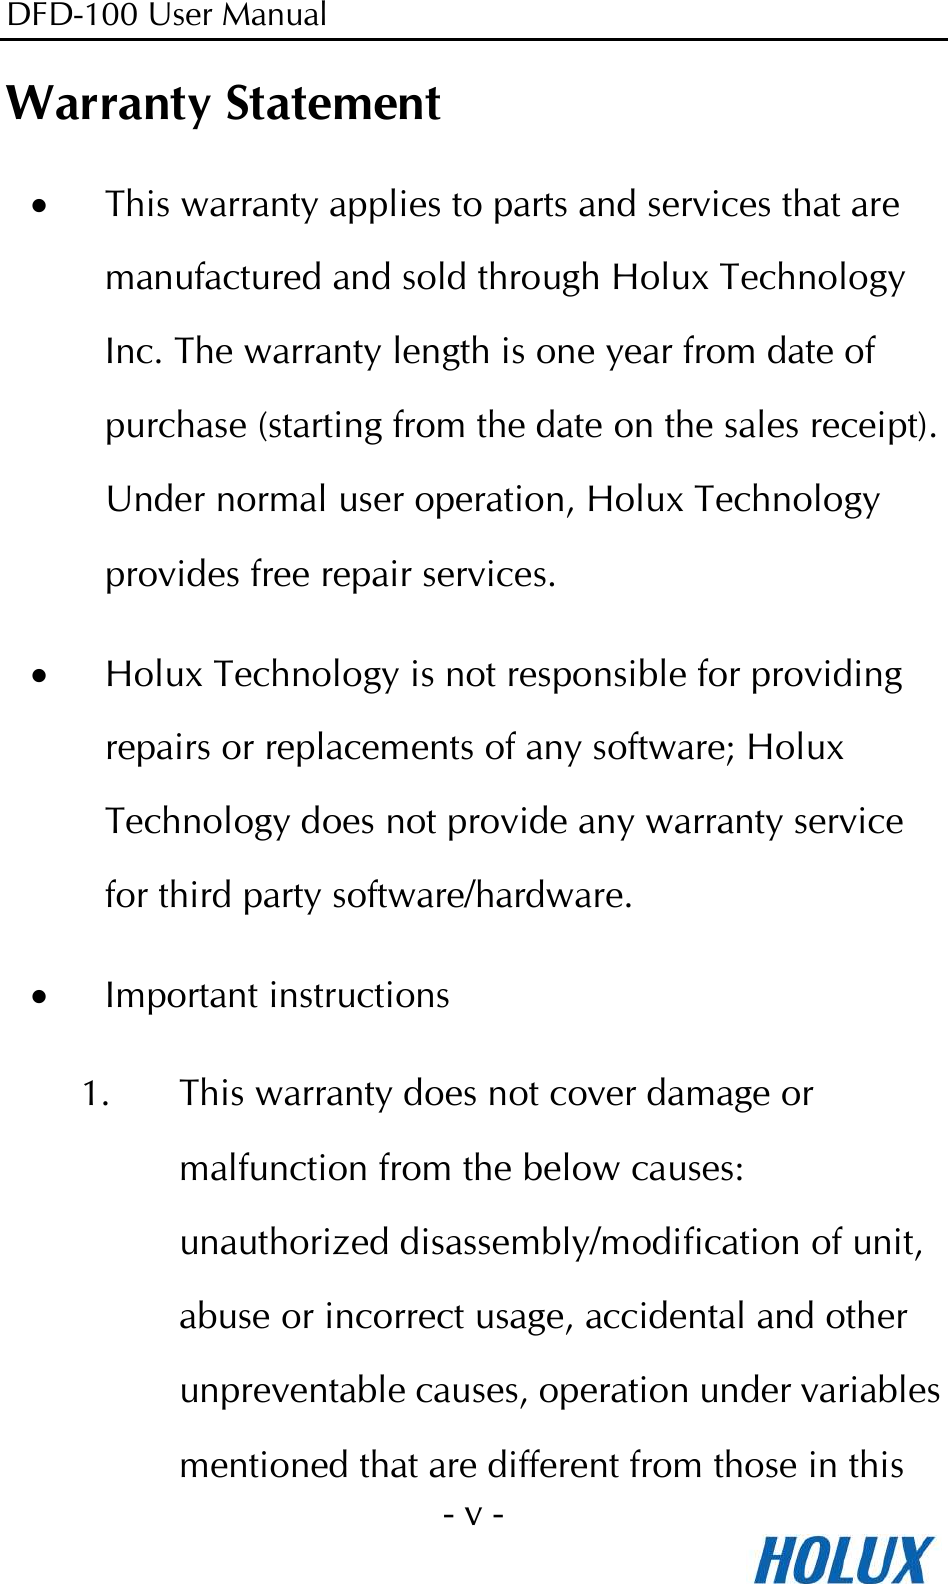 DFD-100 User Manual - v -  Warranty Statement • This warranty applies to parts and services that are manufactured and sold through Holux Technology Inc. The warranty length is one year from date of purchase (starting from the date on the sales receipt). Under normal user operation, Holux Technology provides free repair services. • Holux Technology is not responsible for providing repairs or replacements of any software; Holux Technology does not provide any warranty service for third party software/hardware. • Important instructions 1. This warranty does not cover damage or malfunction from the below causes: unauthorized disassembly/modification of unit, abuse or incorrect usage, accidental and other unpreventable causes, operation under variables mentioned that are different from those in this 